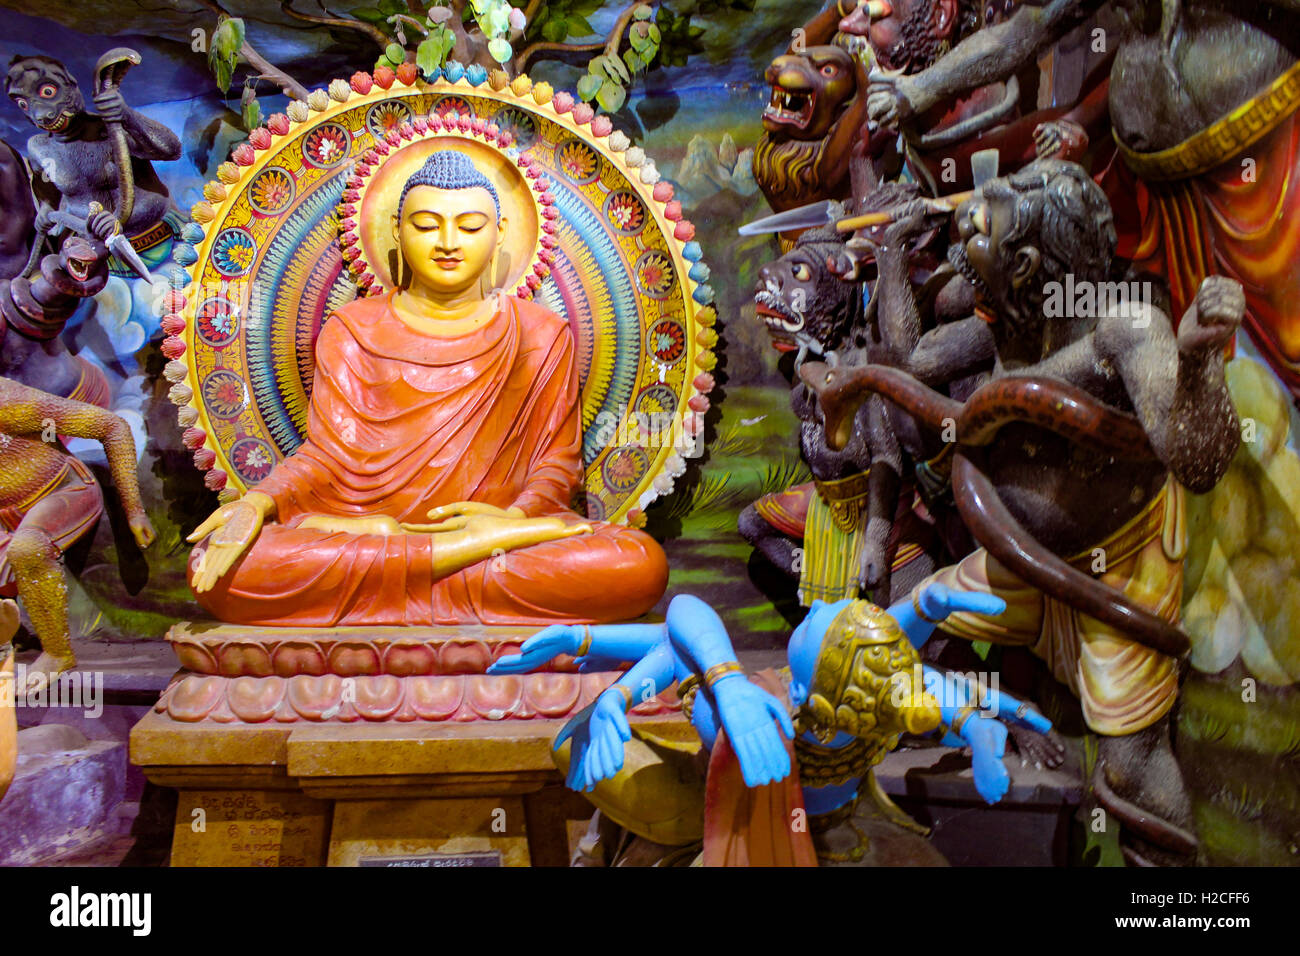 Buddhist depiction of Buddha showing compassion and calm against evil Stock Photo